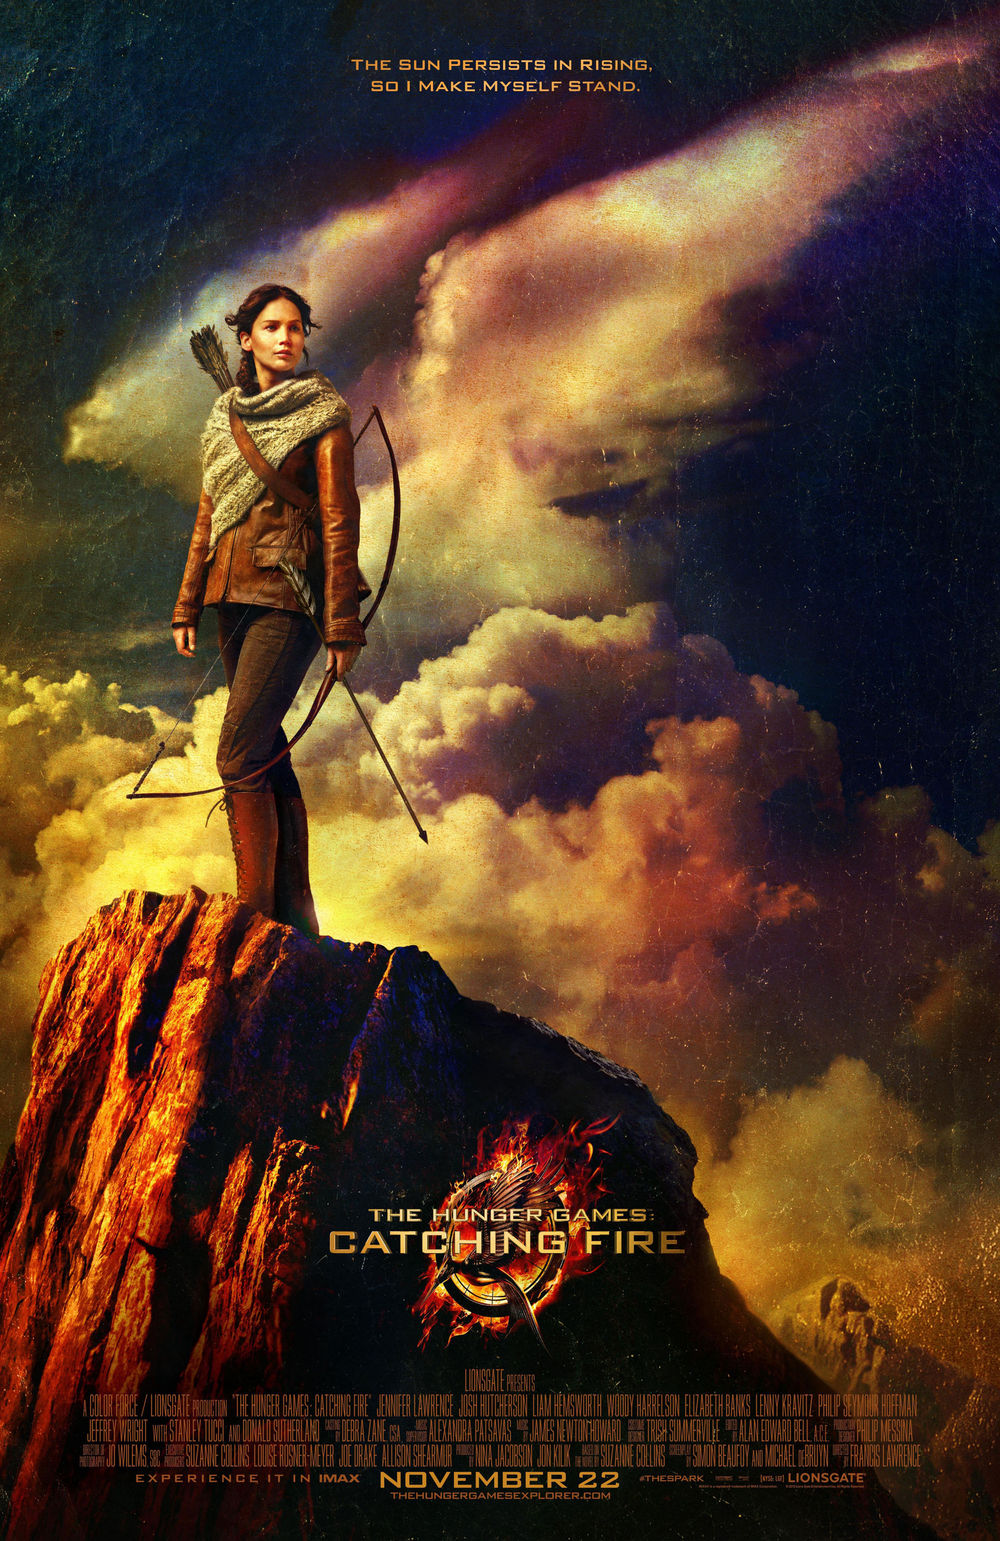 movies torrent: The Hunger Games: Catching Fire (2013)